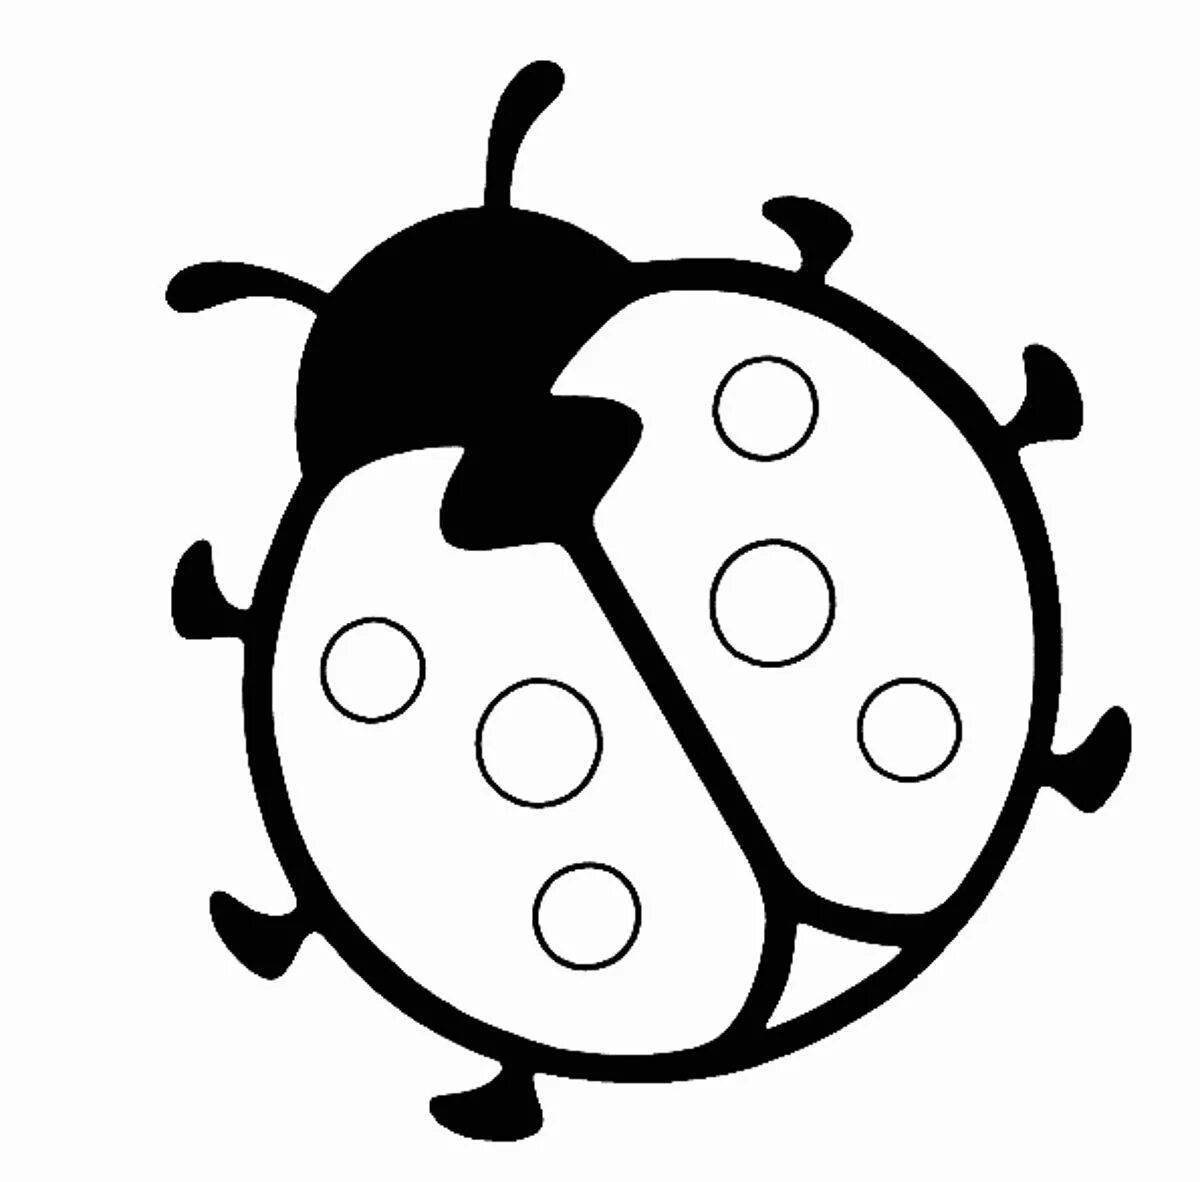 Excellent drawing of a ladybug